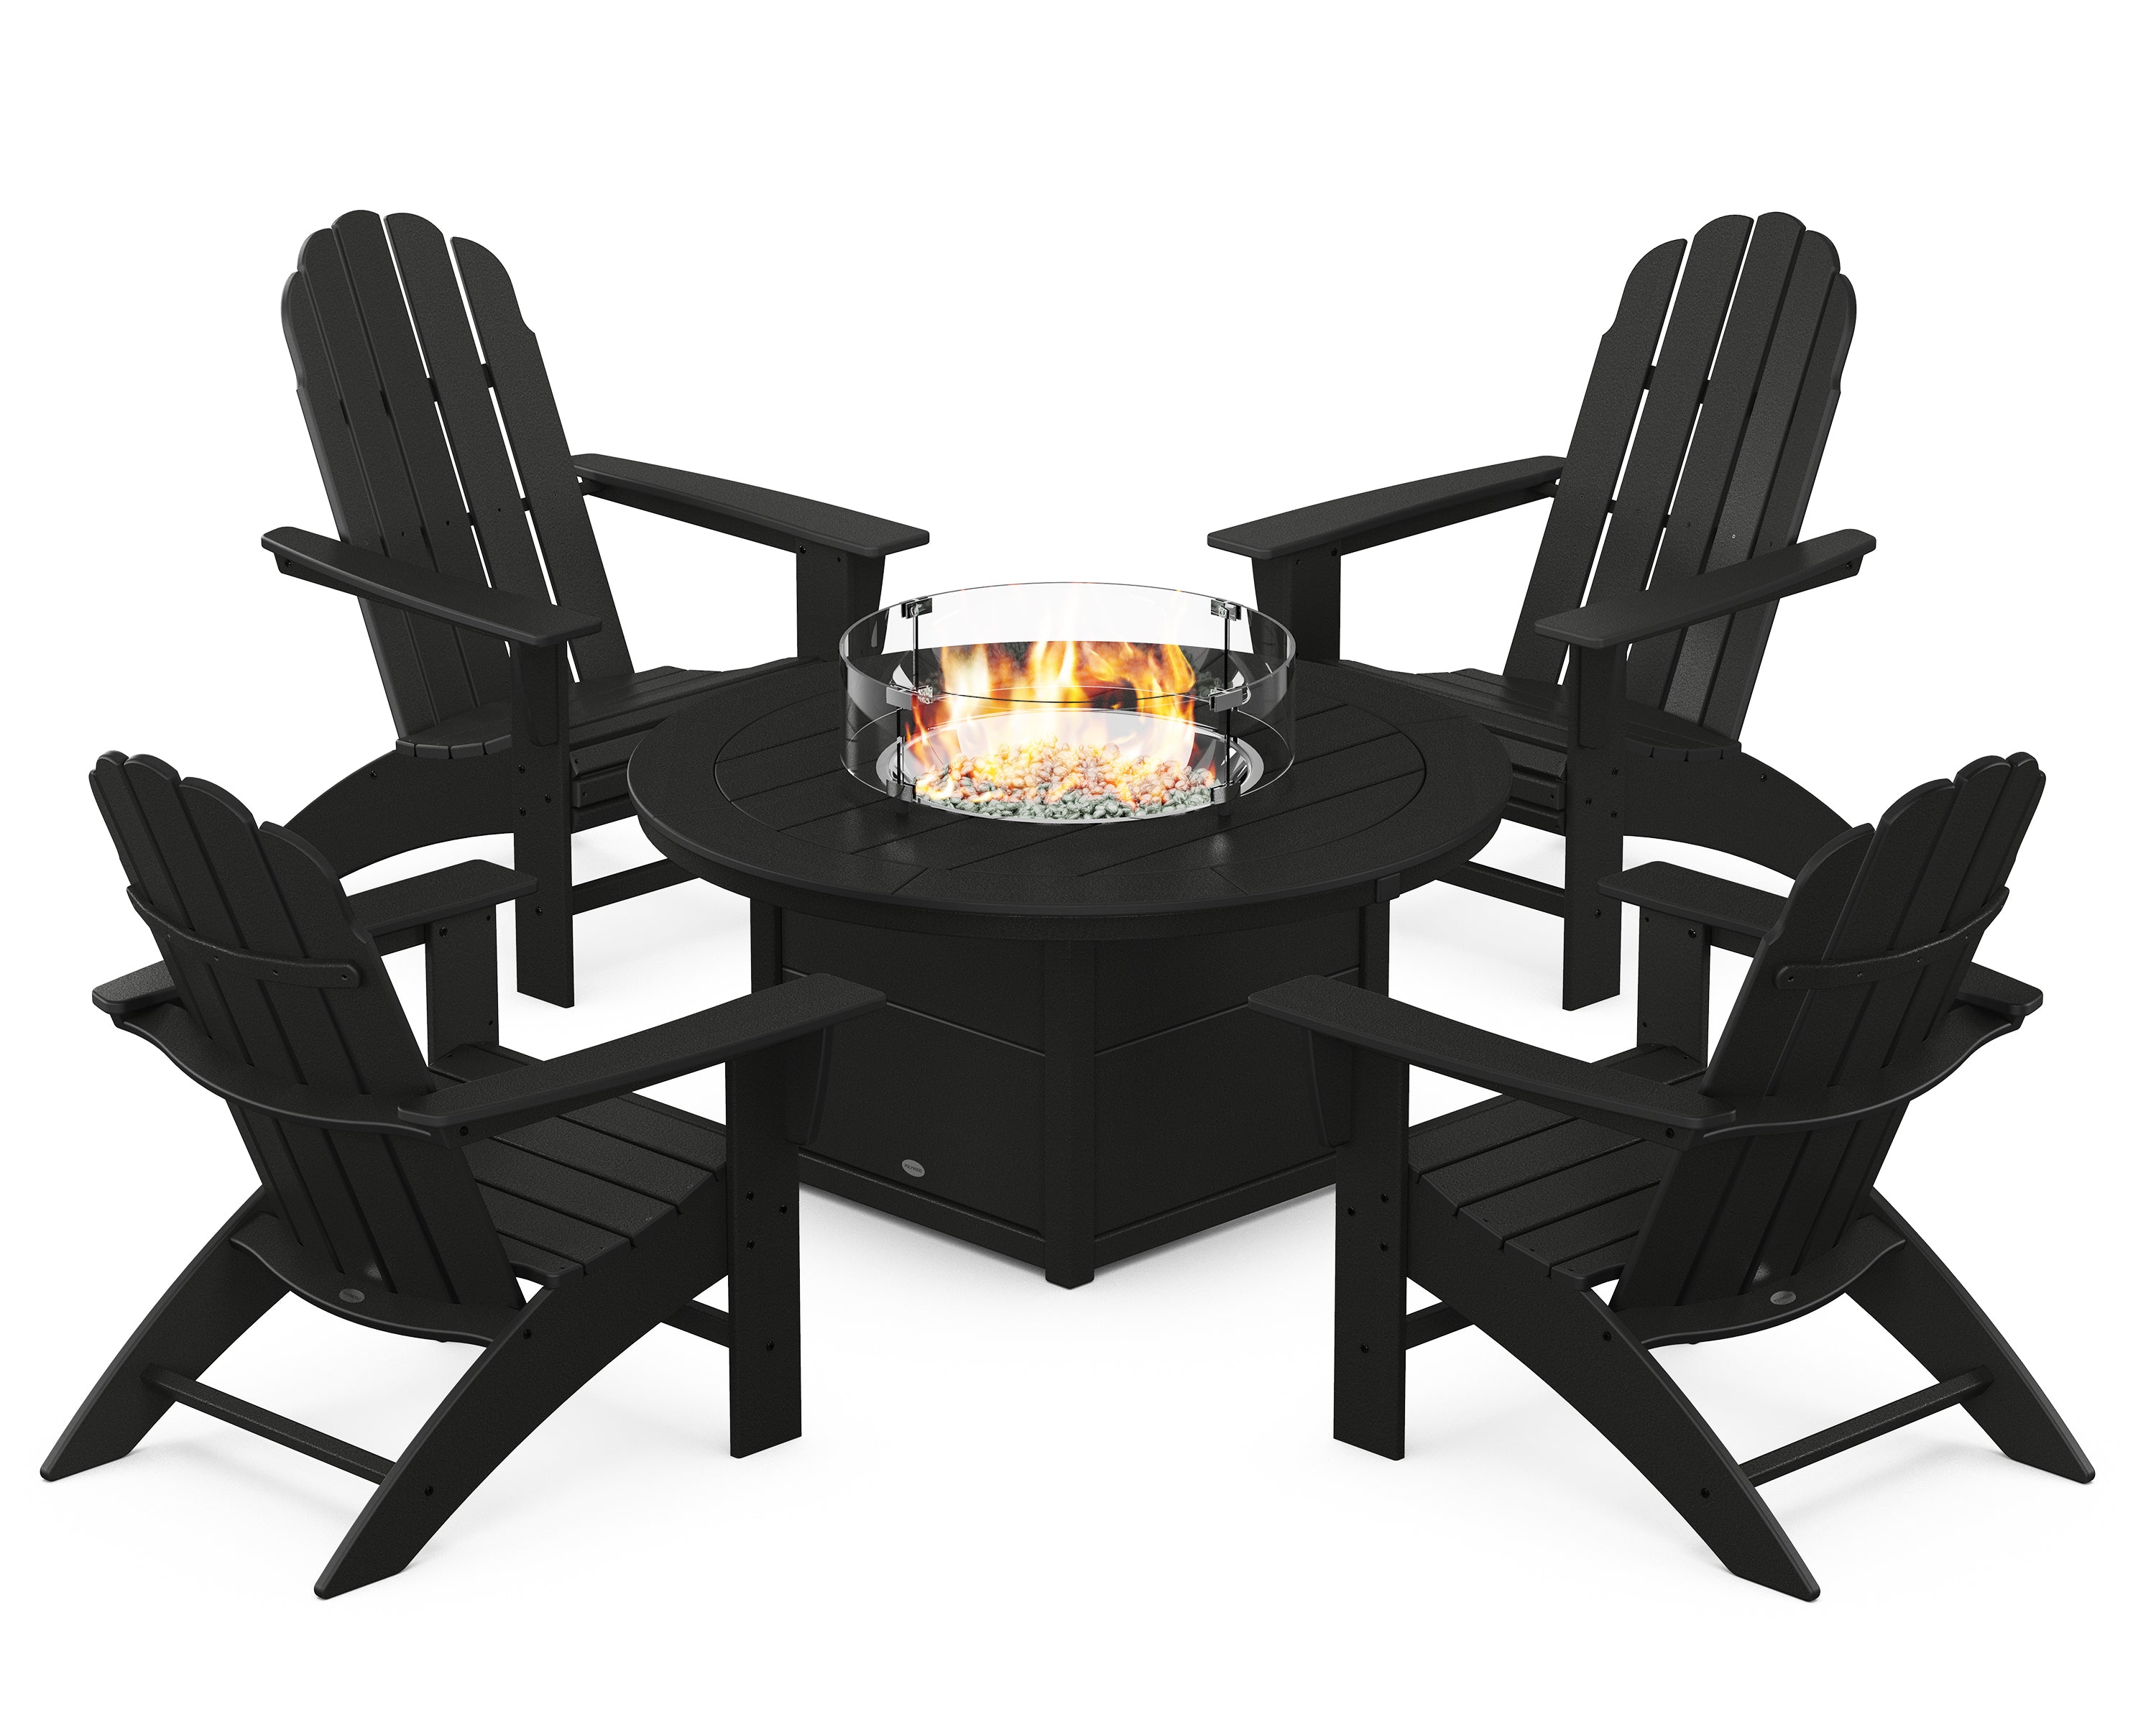 POLYWOOD® Vineyard Curveback Adirondack 5-Piece Conversation Set with Fire Pit Table in Black